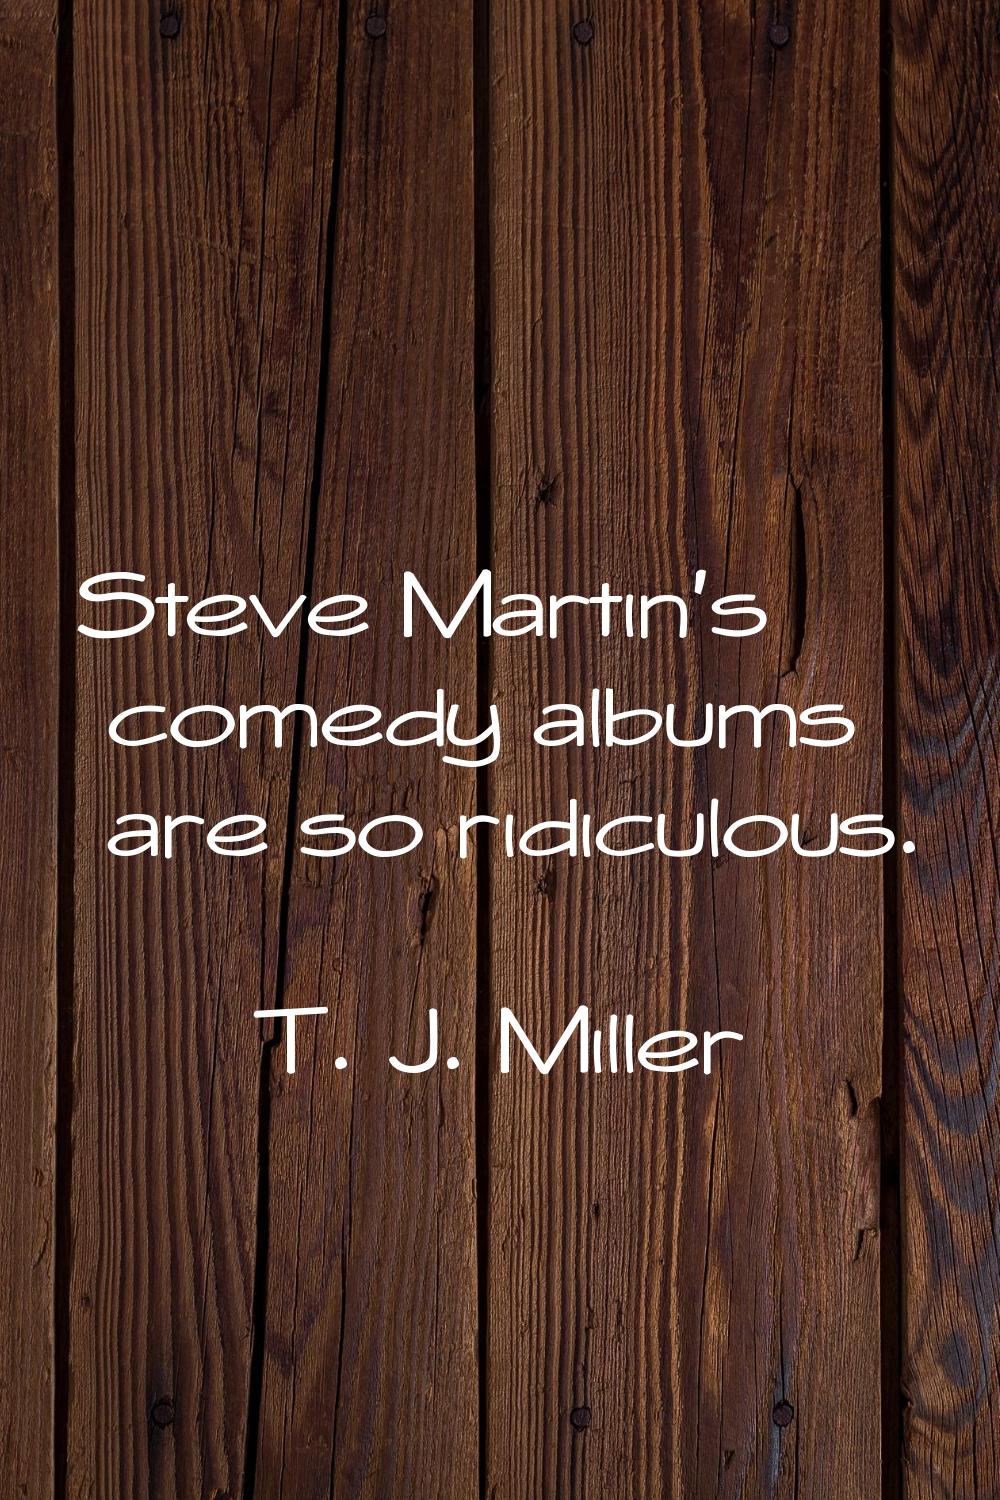 Steve Martin's comedy albums are so ridiculous.